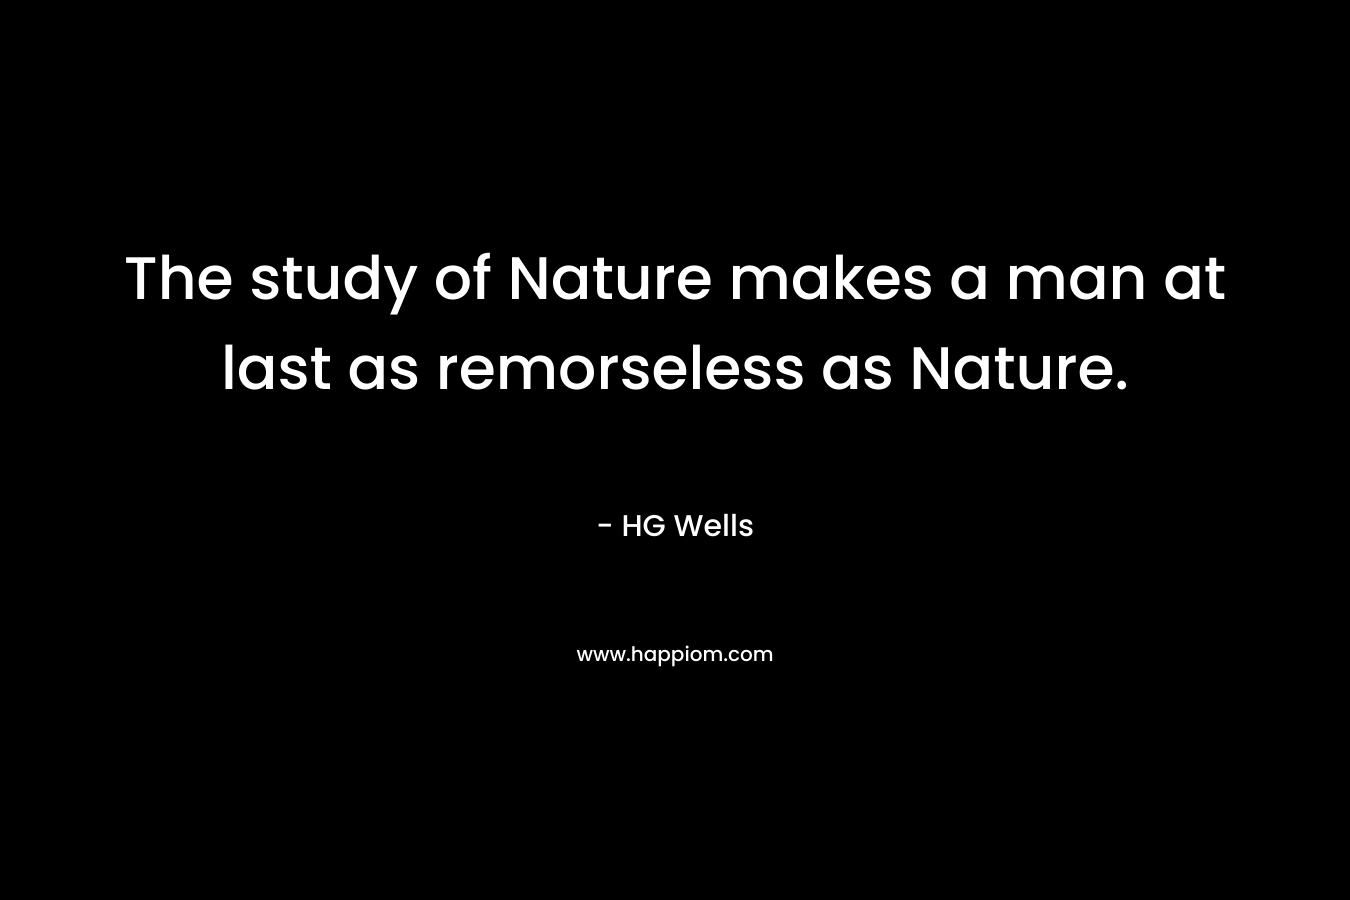 The study of Nature makes a man at last as remorseless as Nature.